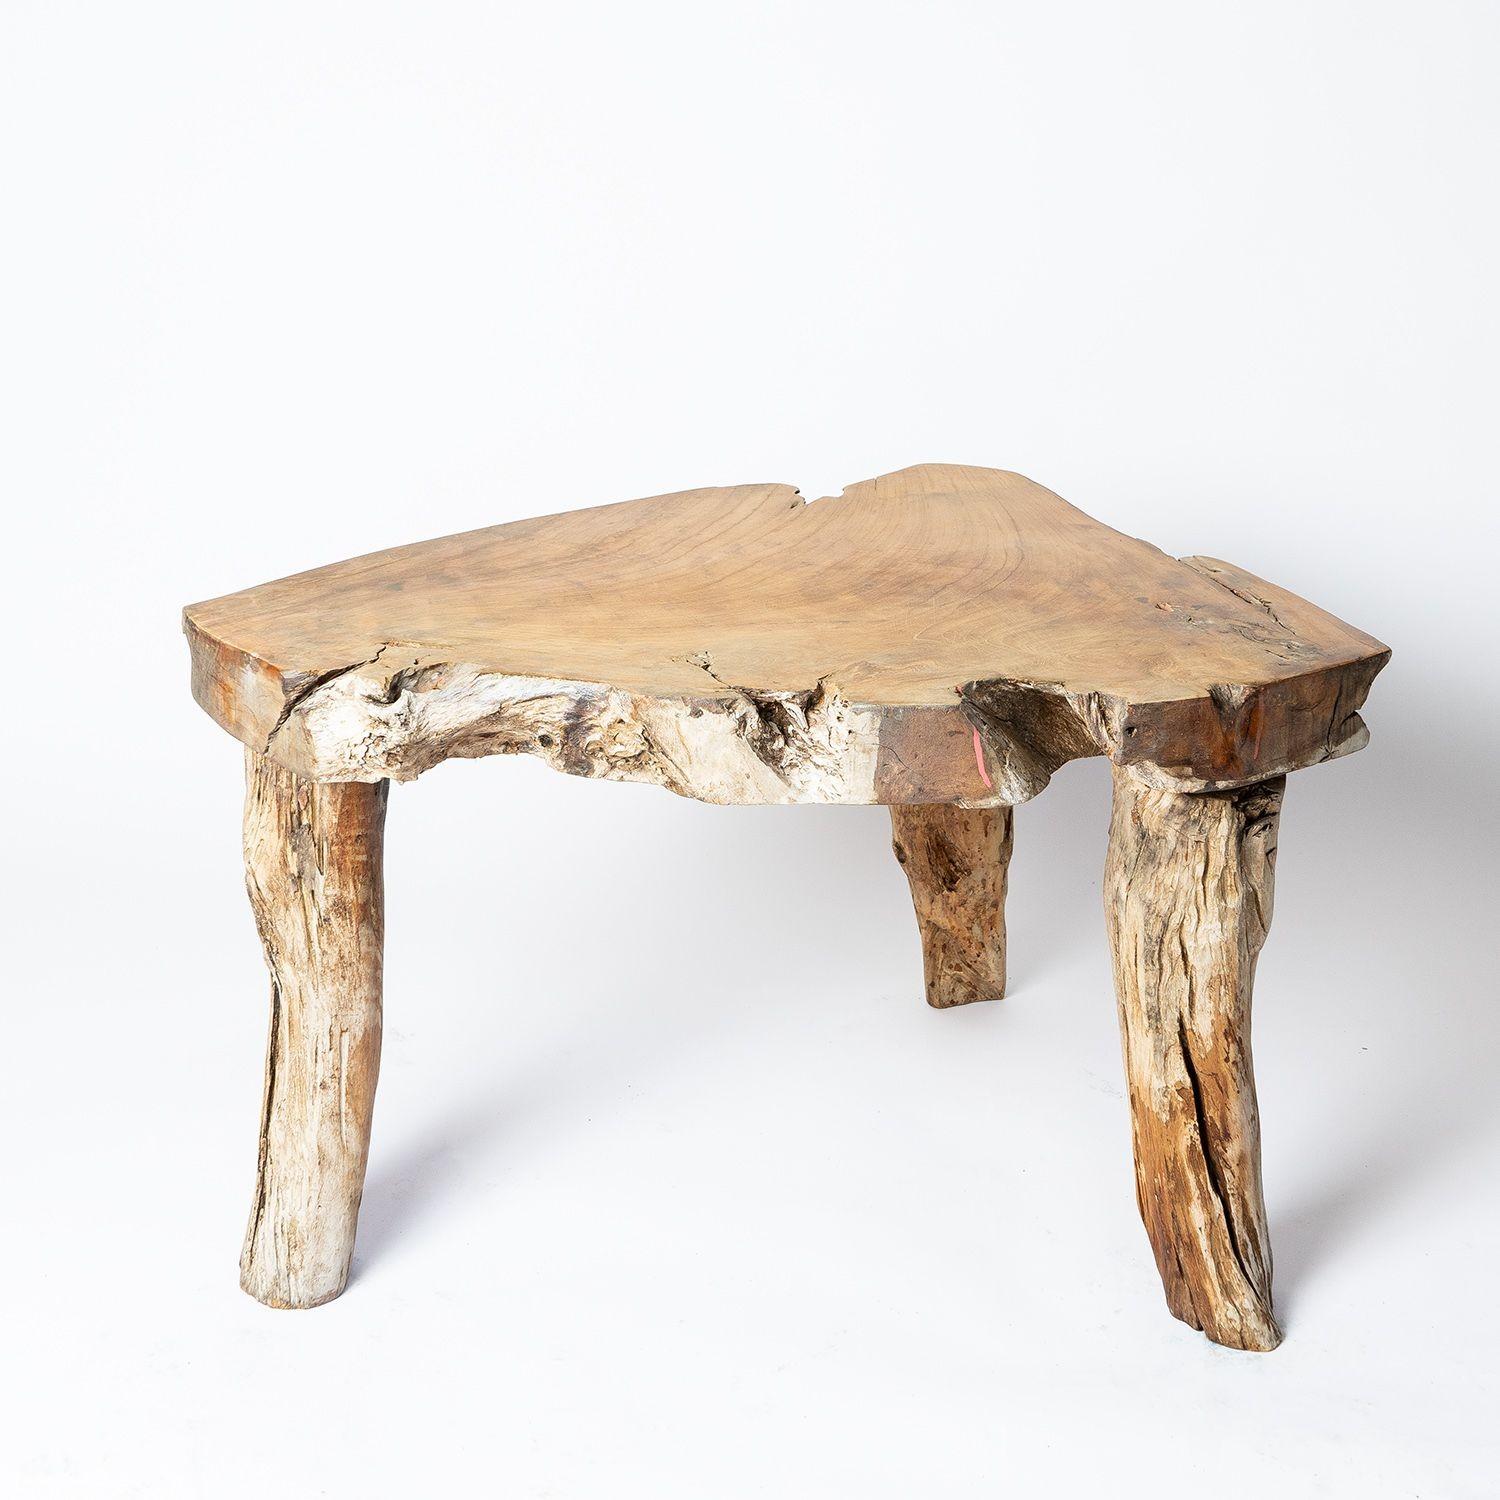 Vintage Rustic Wooden Coffee/Side Table

Chunky wooden top formed from a cross-section of a tree with rough edges and planed top.

Sitting on thick tripod legs formed from tree branches.

Probably French in origin and dating from the Mid-20th